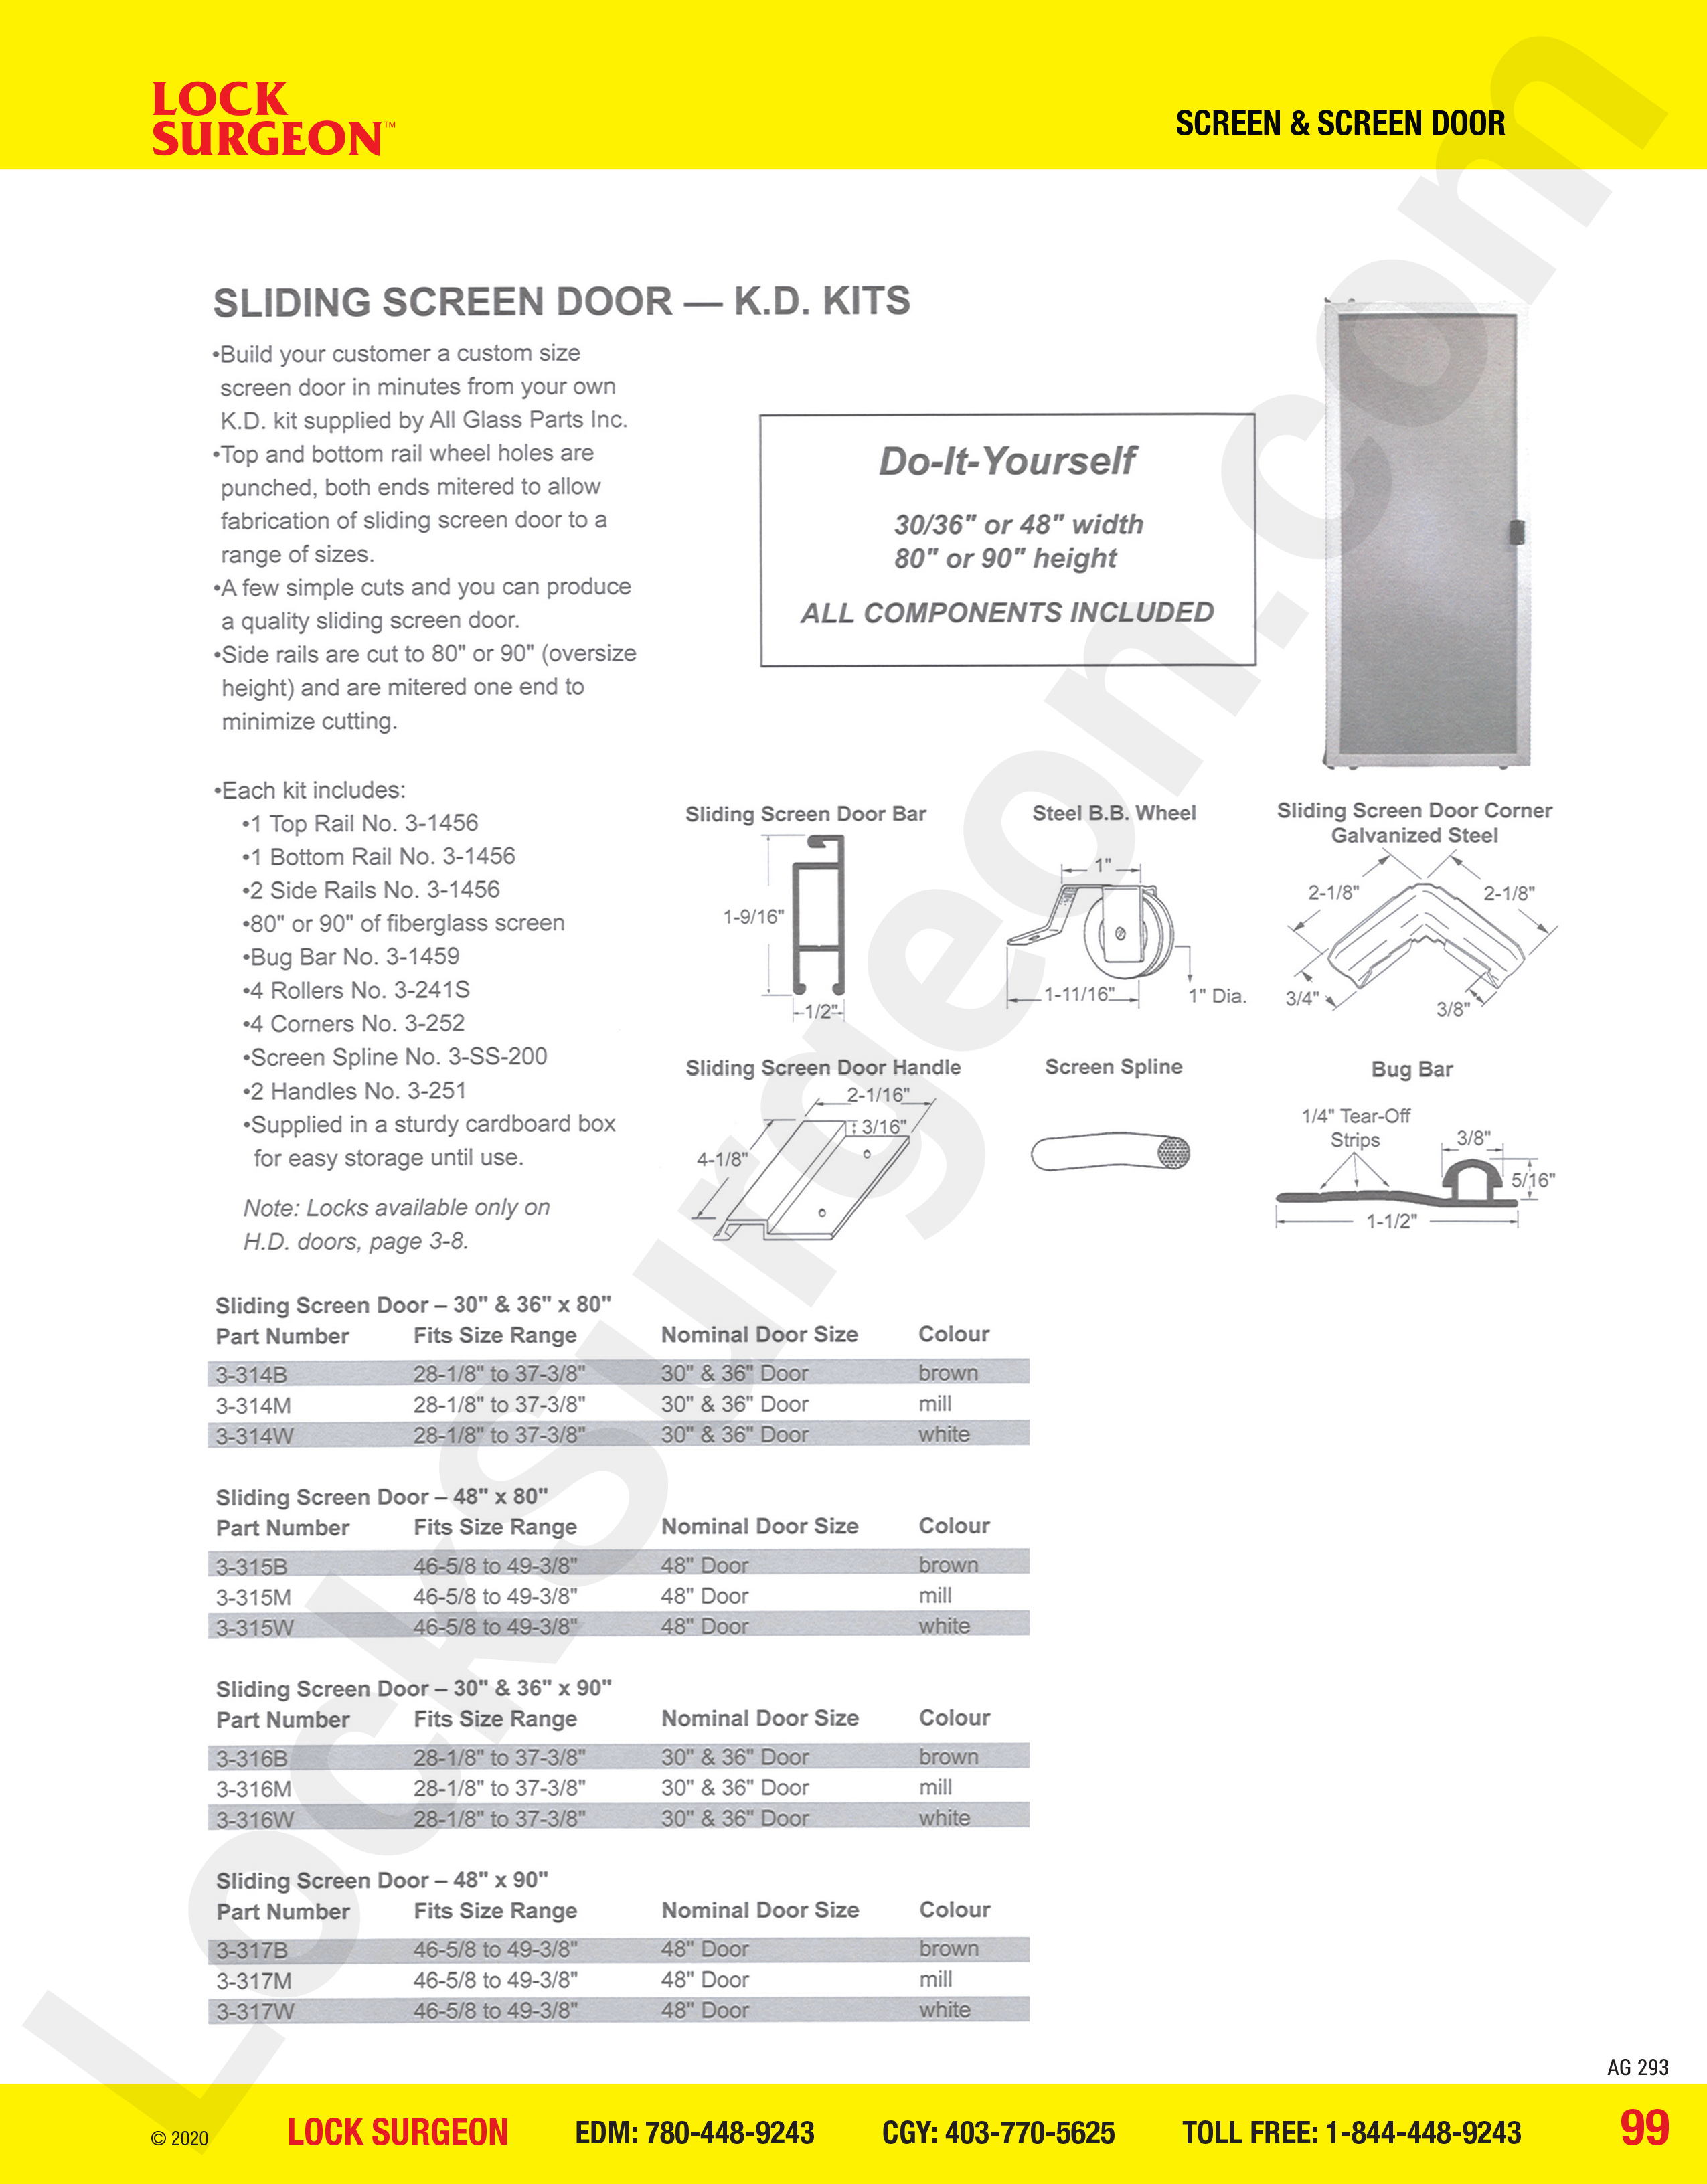 Lock Surgeon Edmonton South sliding screen door kits all components included.